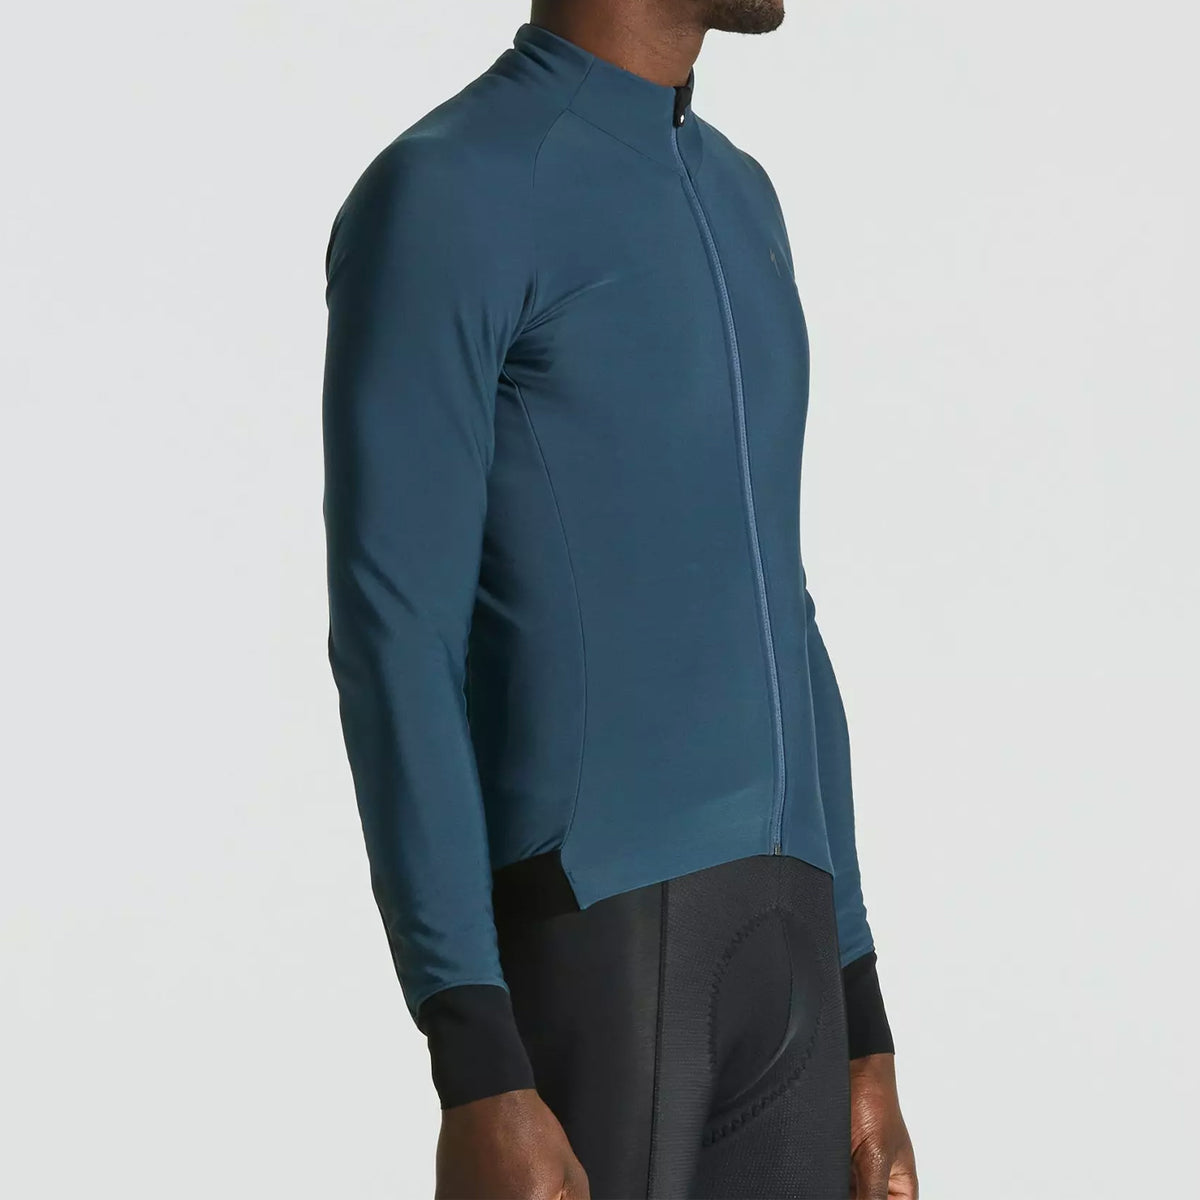 Specialized SL Expert Thermal long sleeves jersey - Blue – All4cycling